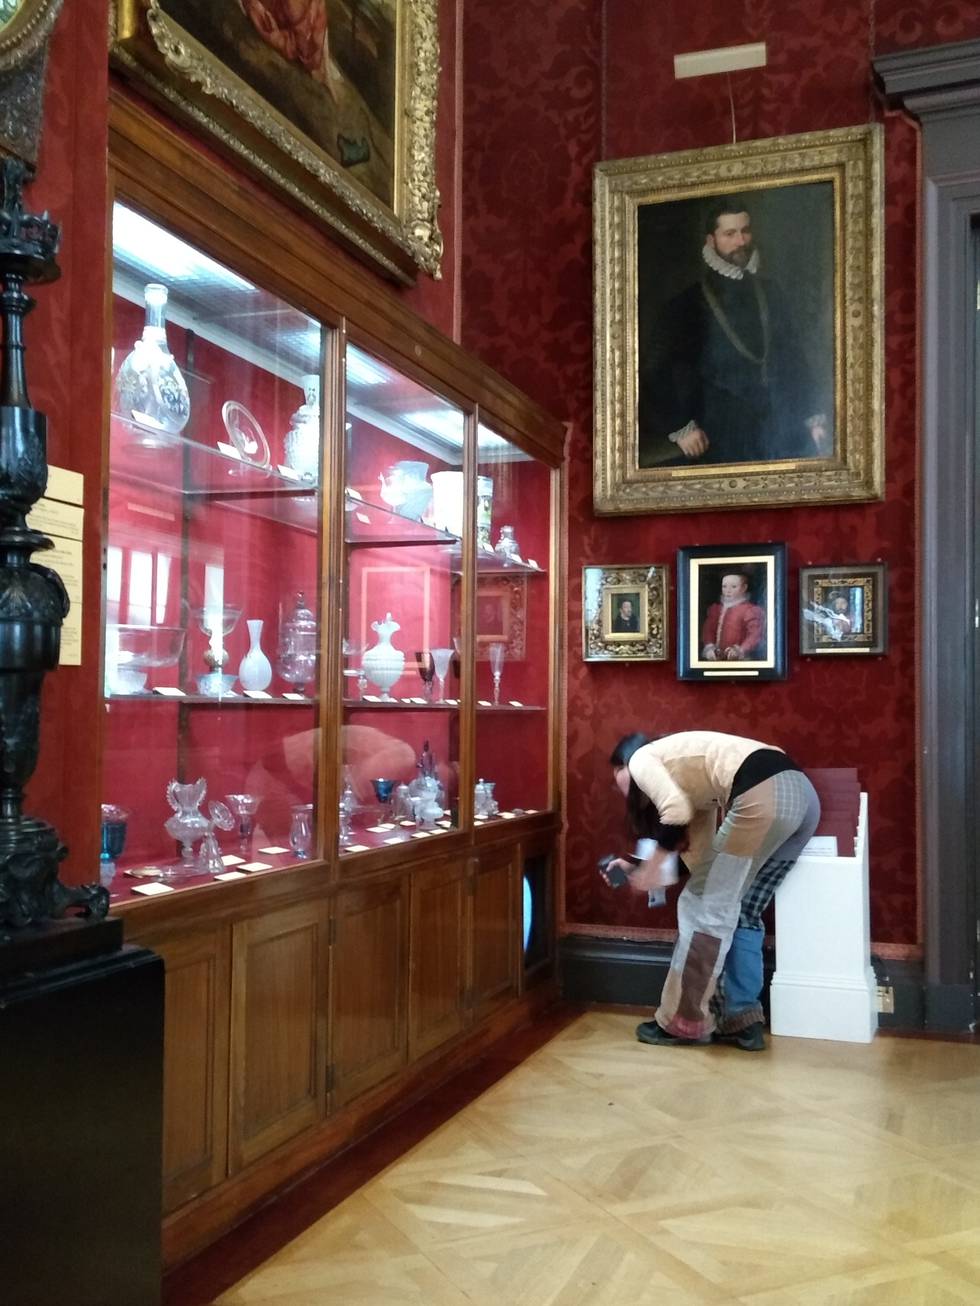 Women crouching by cabinet a gallery at The Wallace Collection